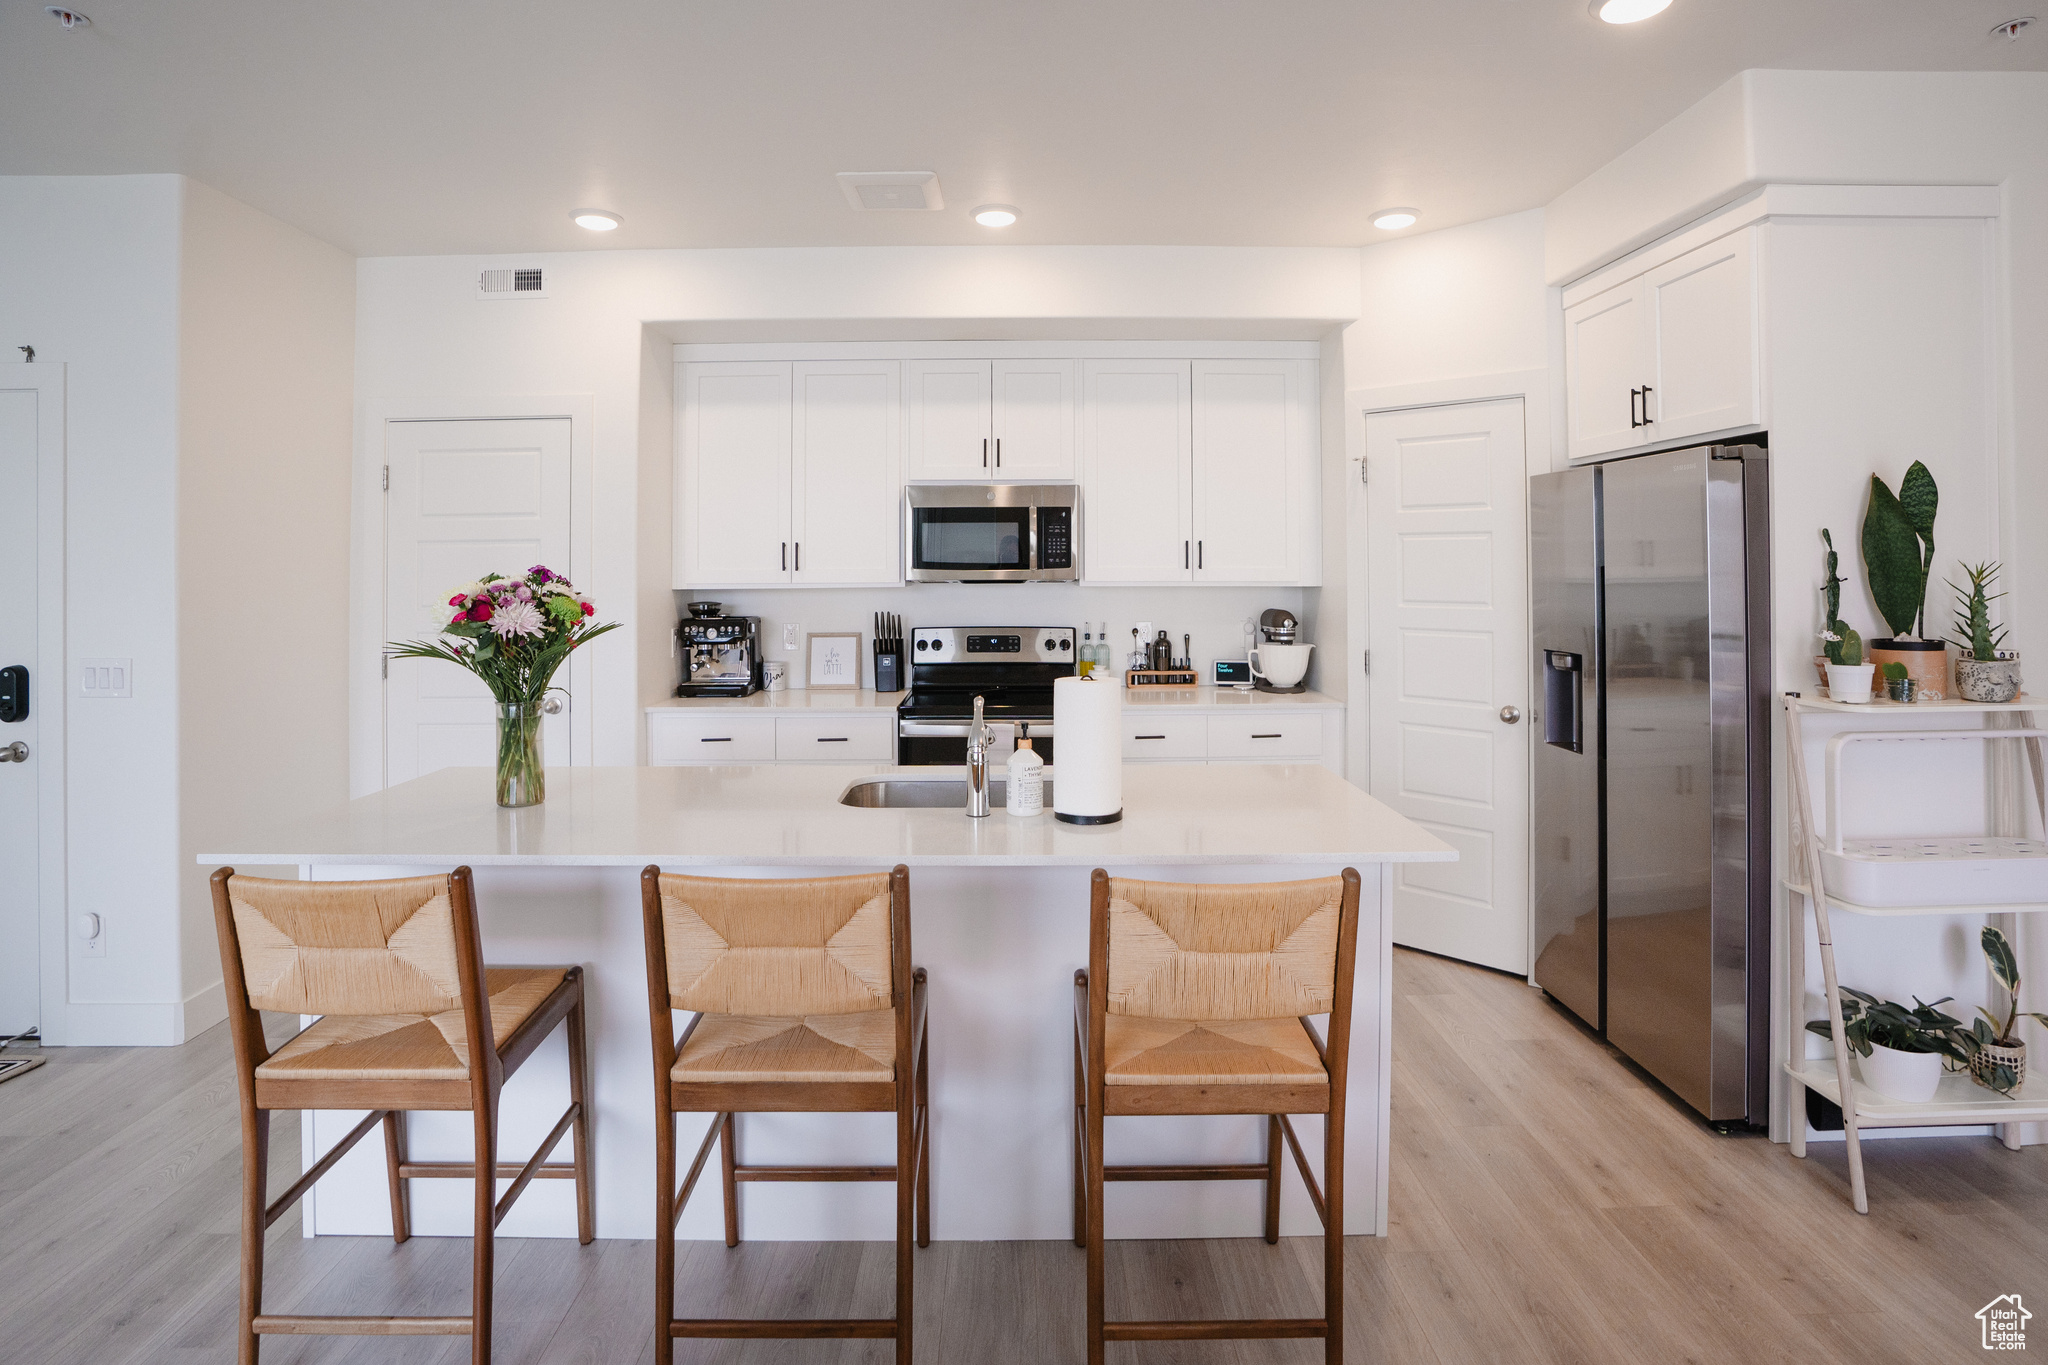 Kitchen featuring appliances with stainless steel finishes, a center island with sink, white cabinetry, a kitchen breakfast bar, and light wood-type flooring